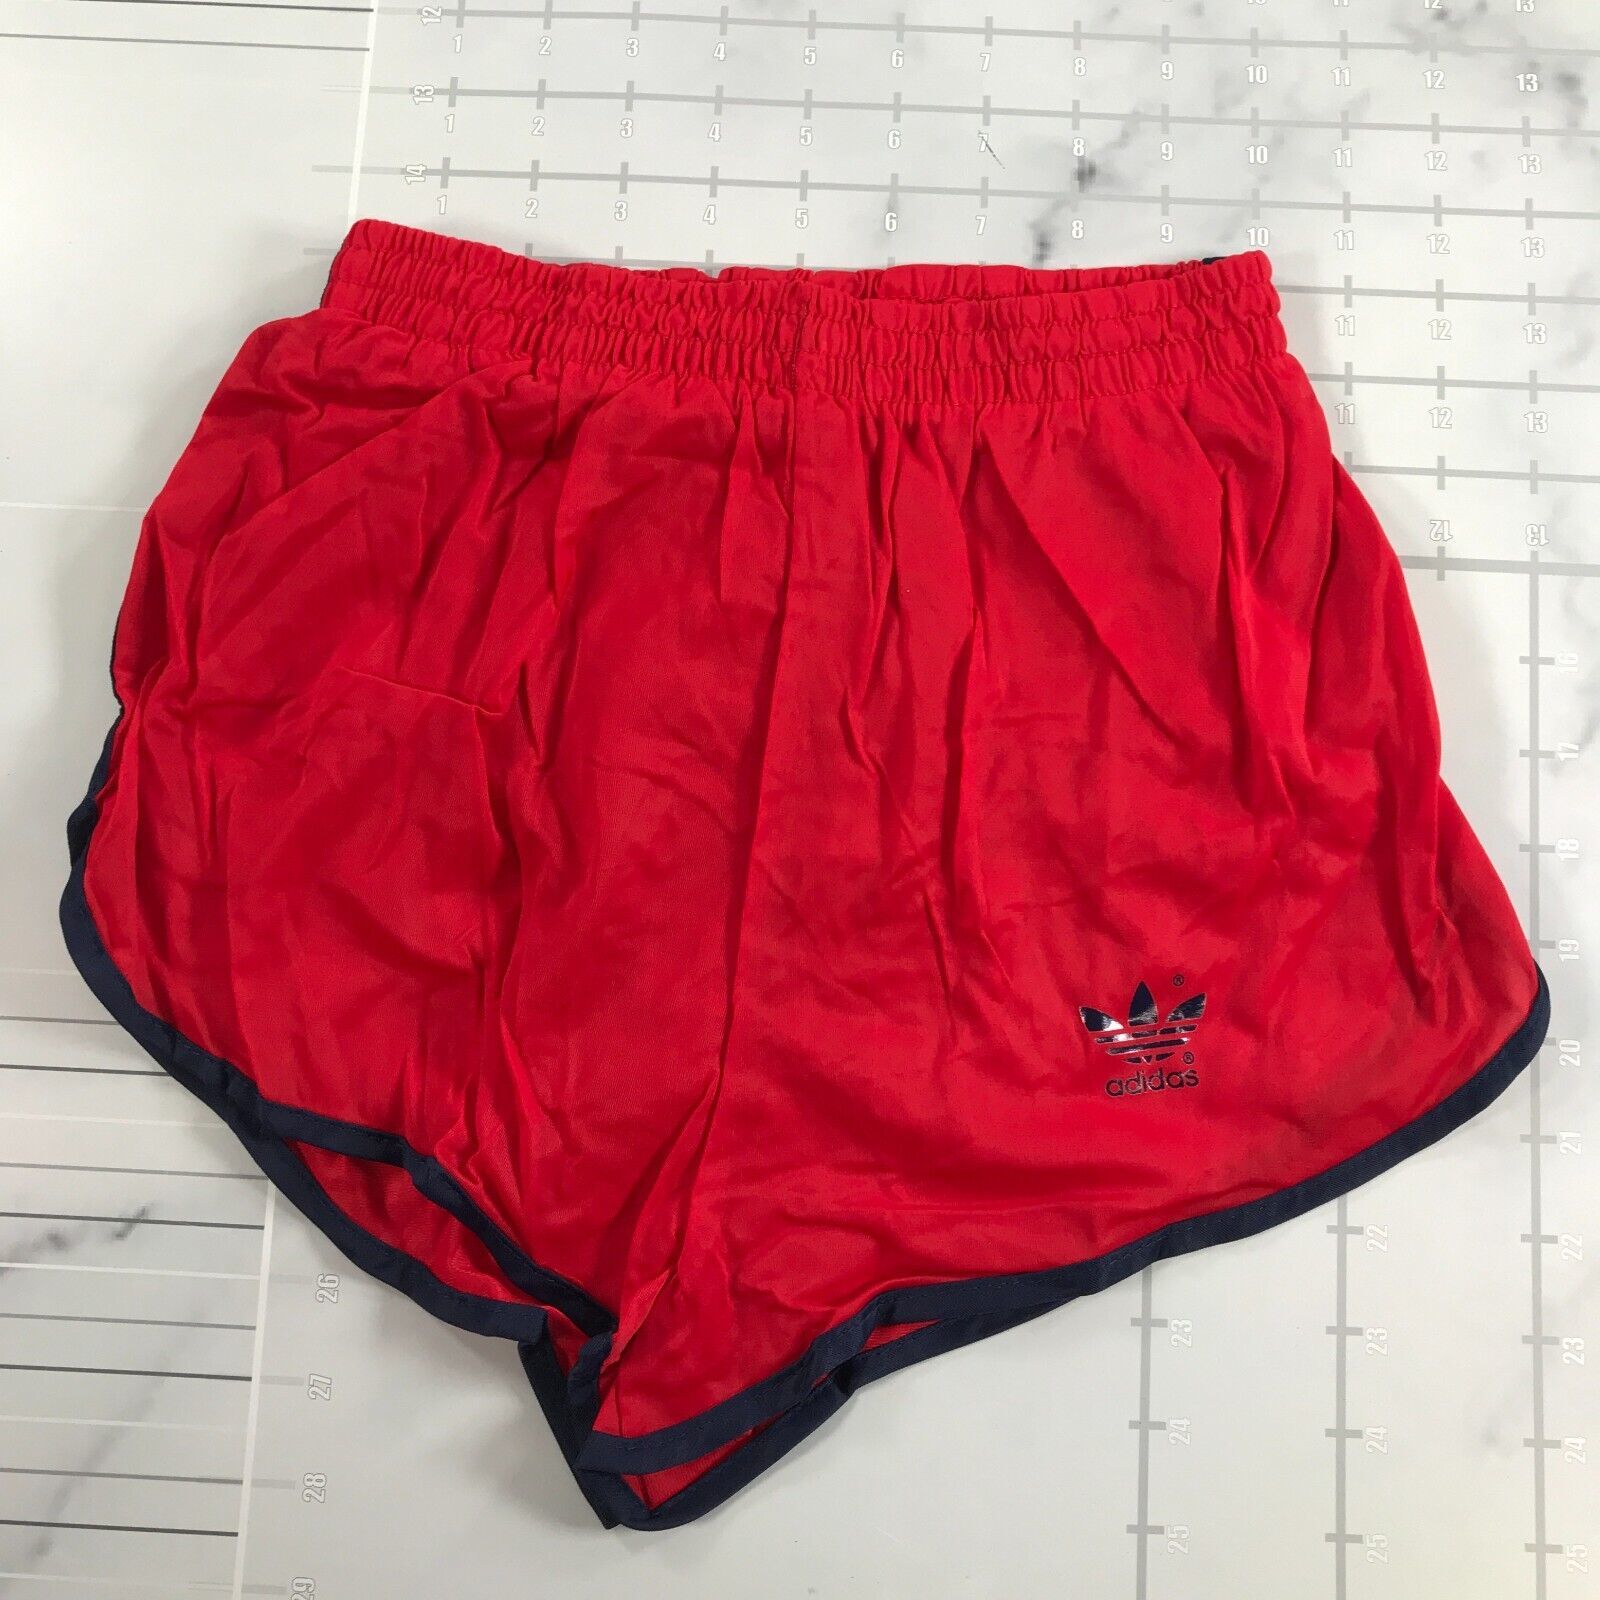 Primary image for Vintage Adidas Running Shorts Mens S 28-30 Red Navy Blue Striped Trefoil